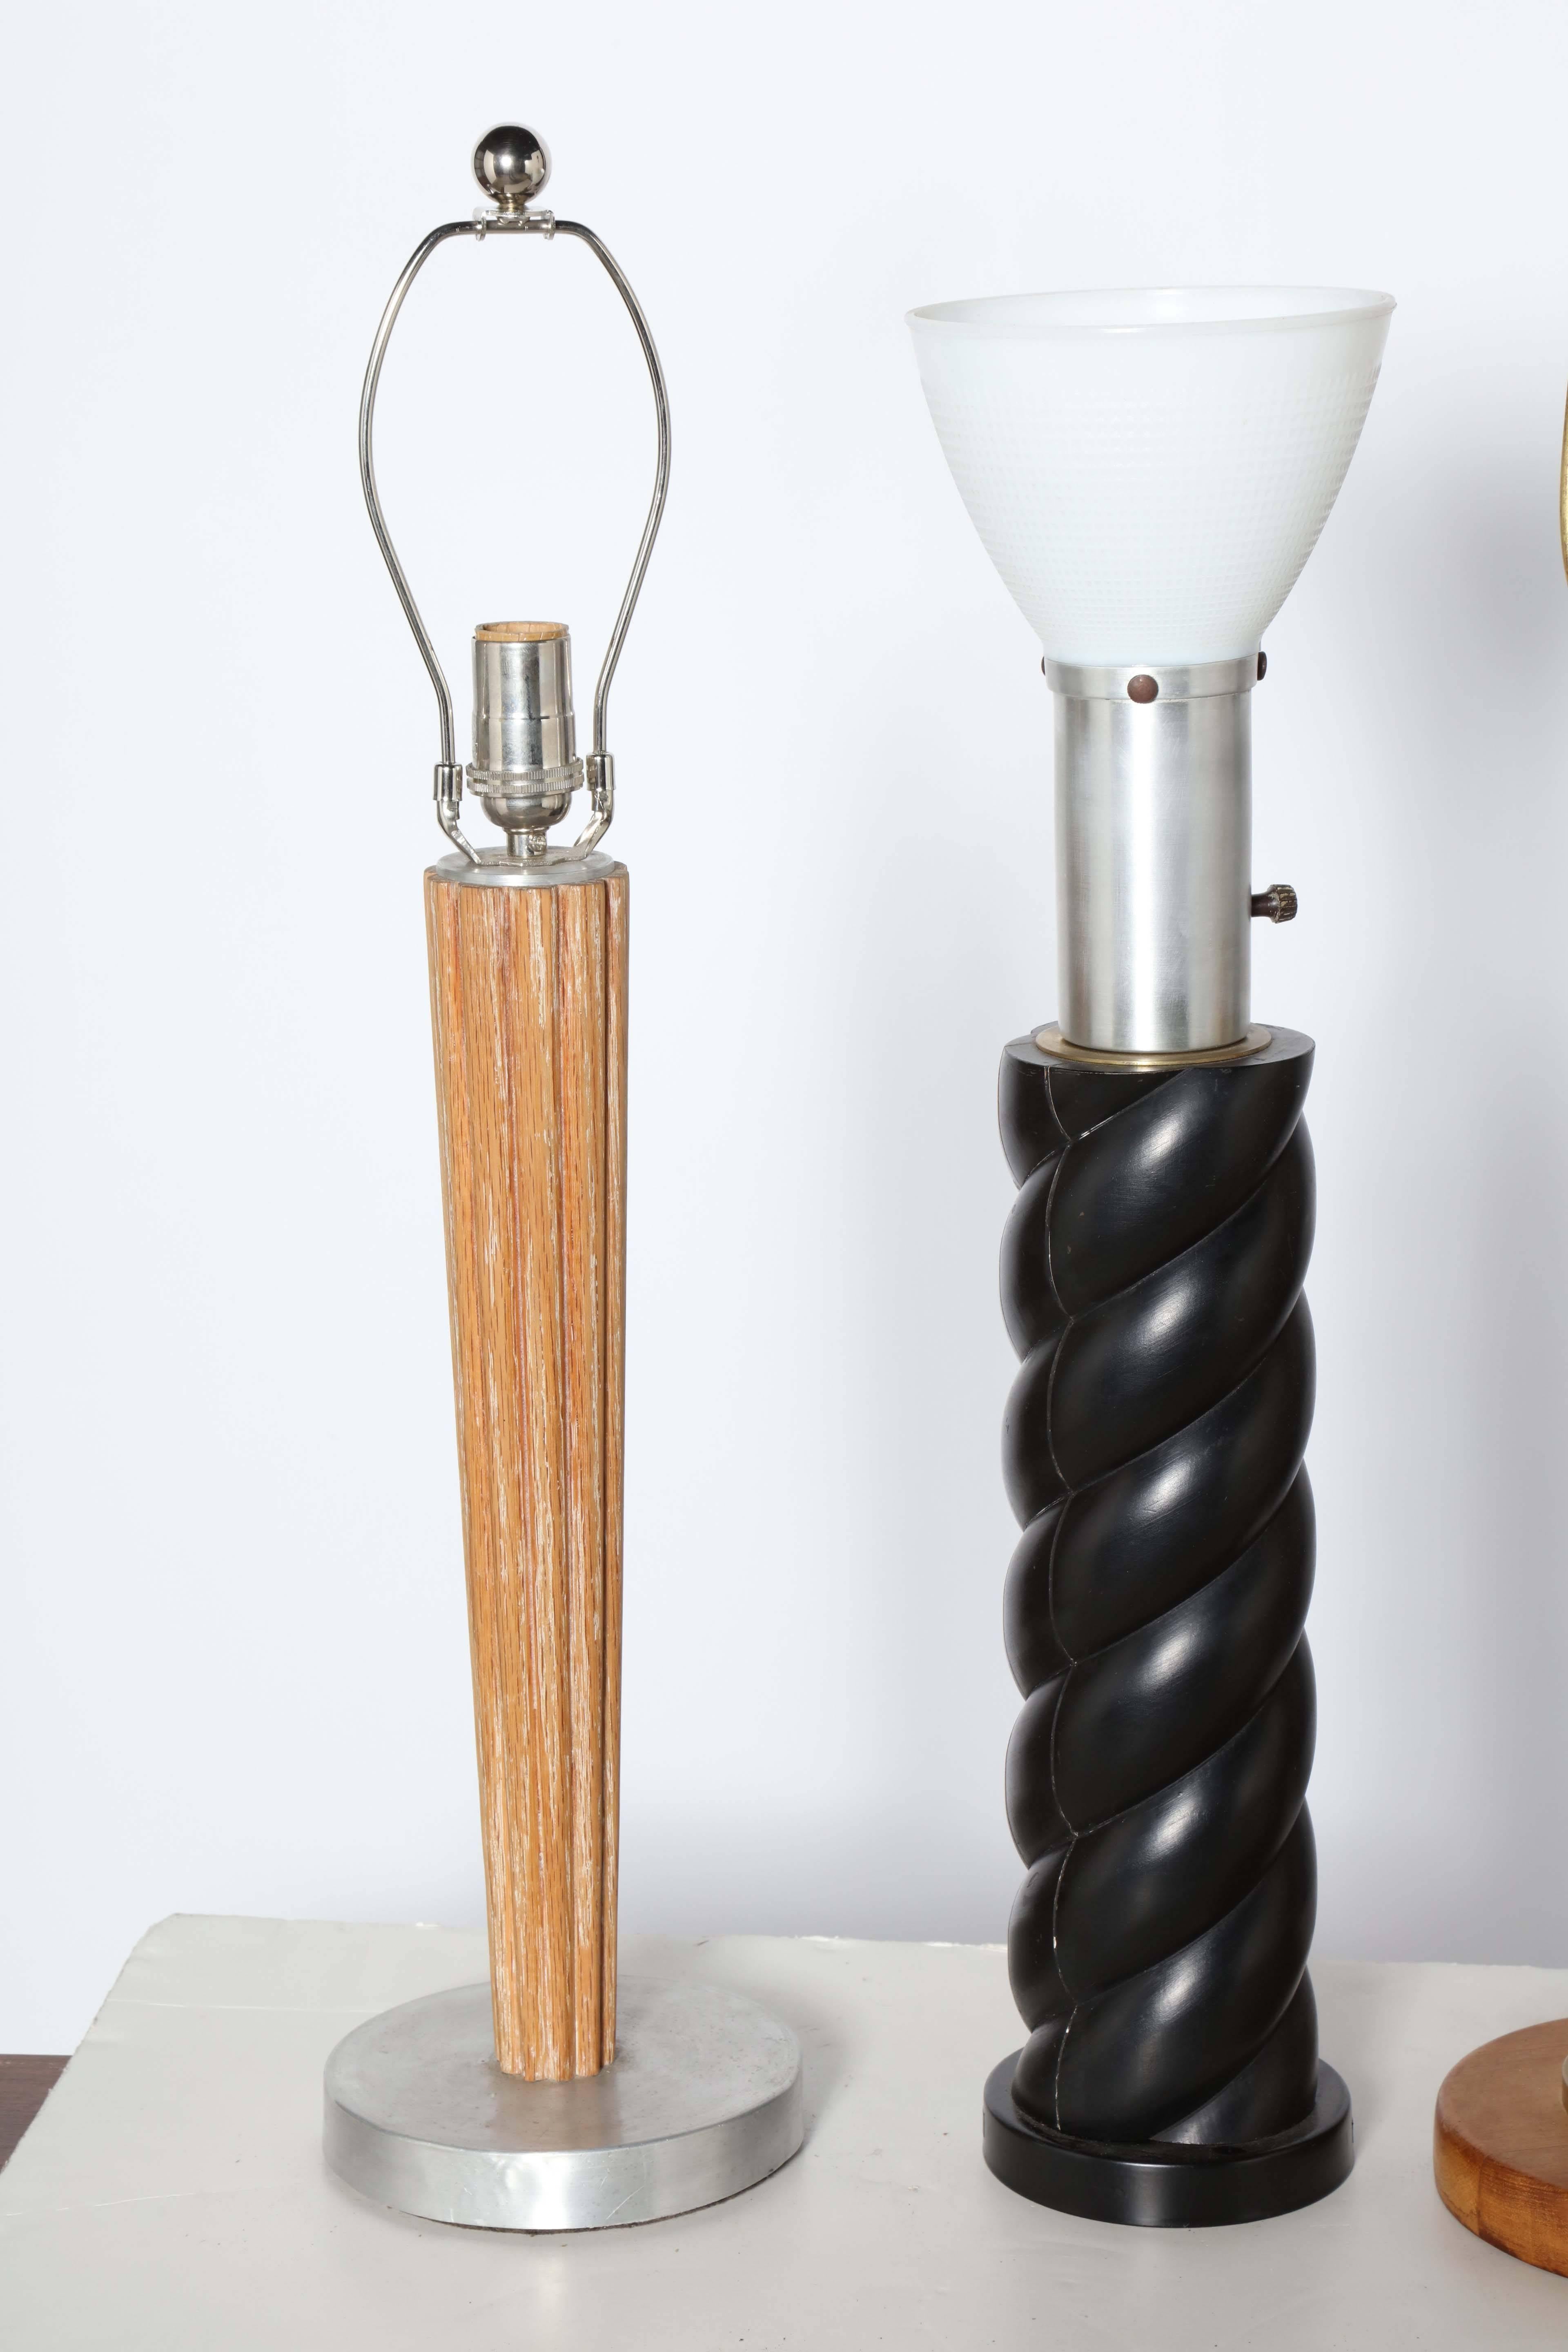 An array of Russel Wright Table Lamps produced from the 1930's-1950's in Wood, Aluminum, Brass and Glass are made in USA, rewired and available for $1750 each.  PLease see detailed descriptions below:
RIGHT: 1940s Machine Age Spun Aluminum and Glass